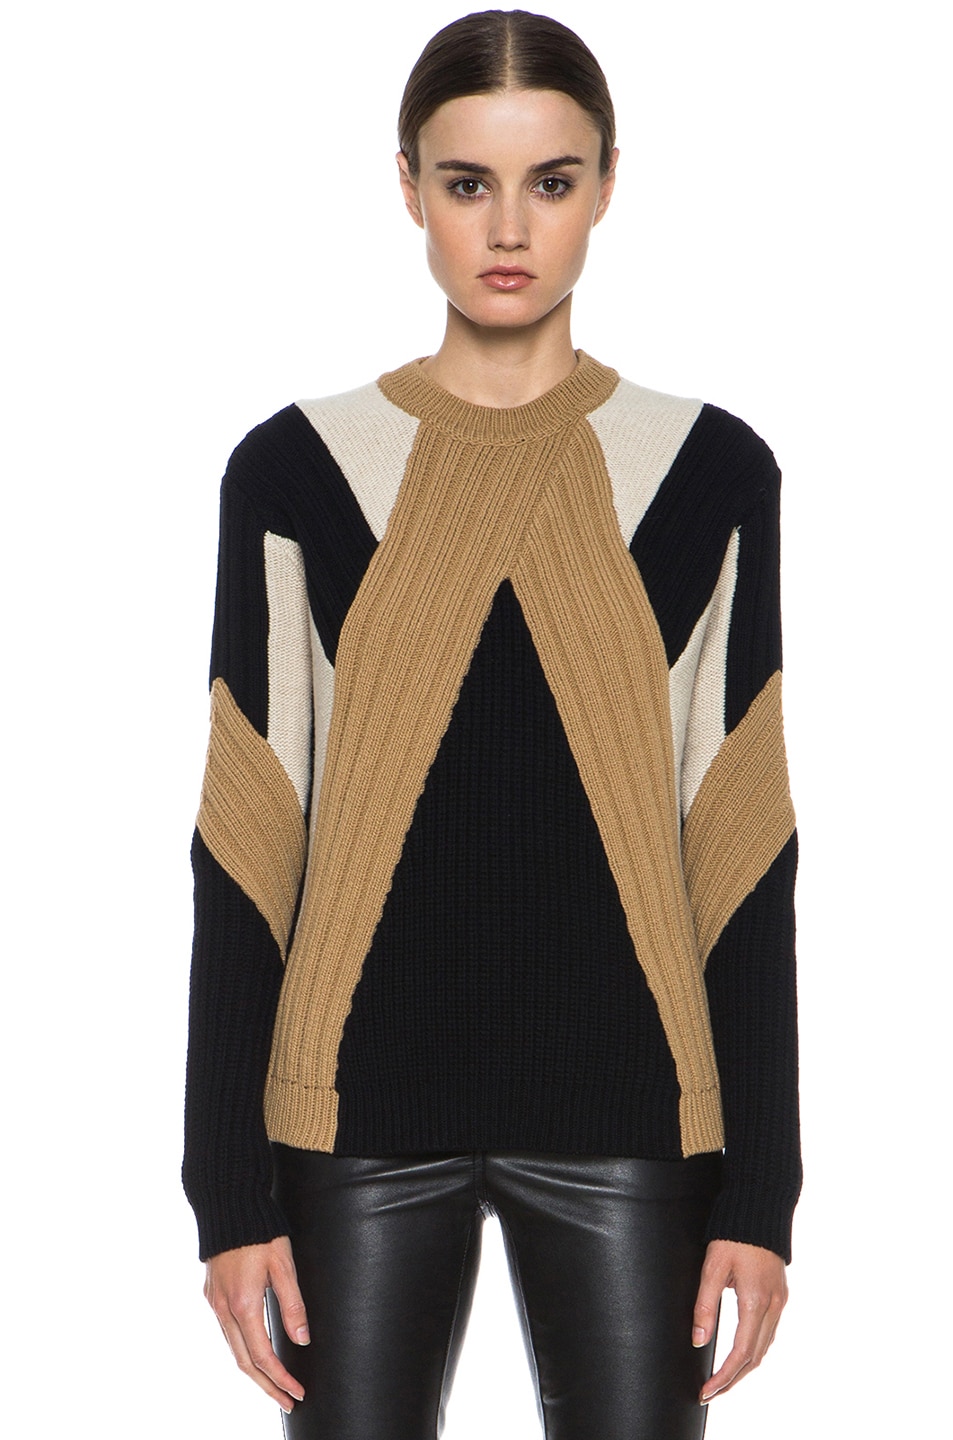 Givenchy Crew Neck Ribbed Wool-Blend Pullover in Black & Beige | FWRD